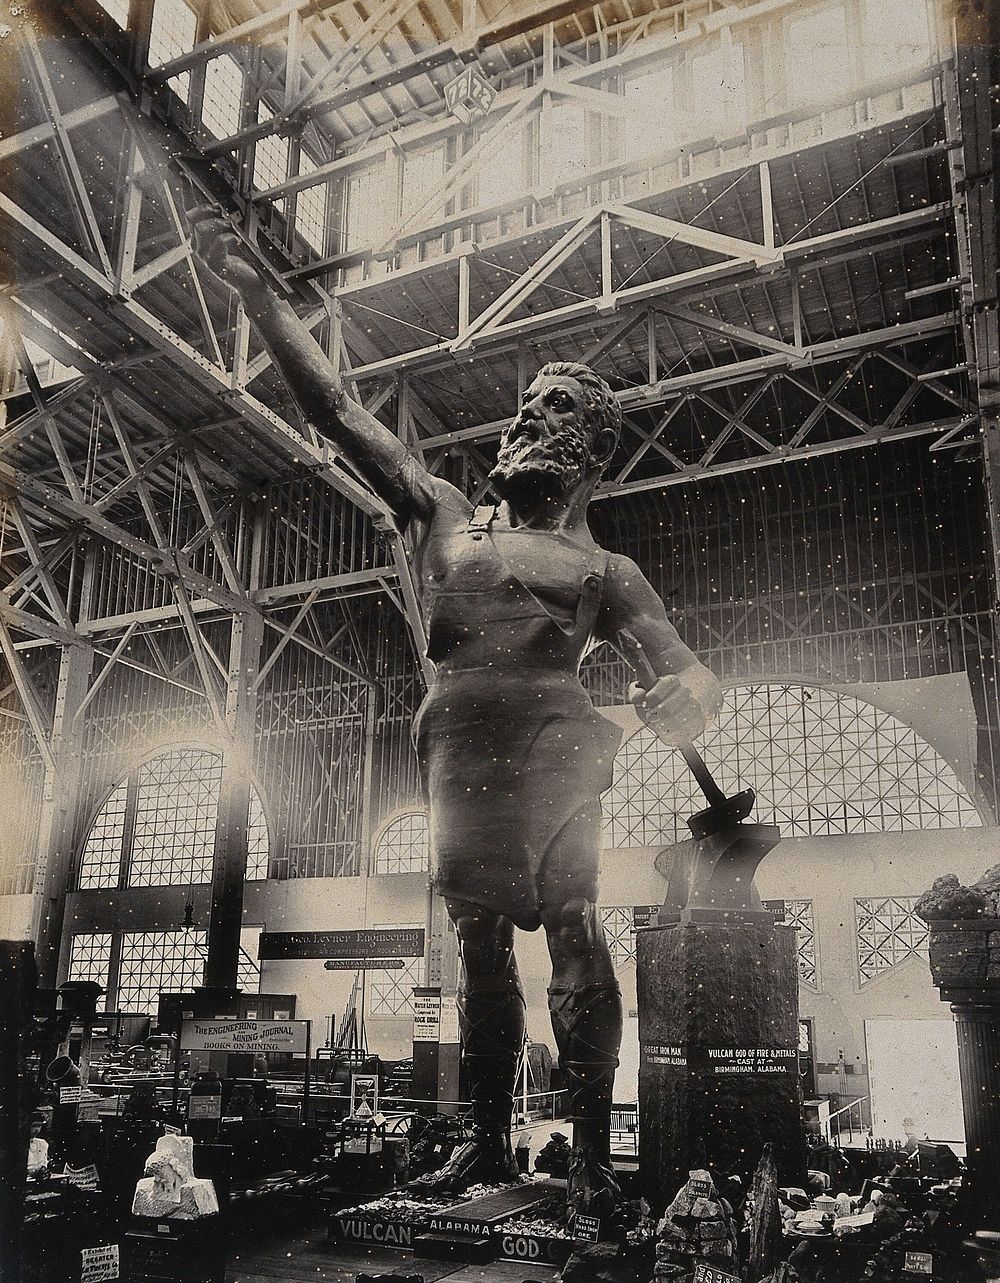 The 1904 World's Fair, St. Louis, Missouri: Vulcan, the Roman god of the forge: a 56 foot high statue in the Palace of Mines…